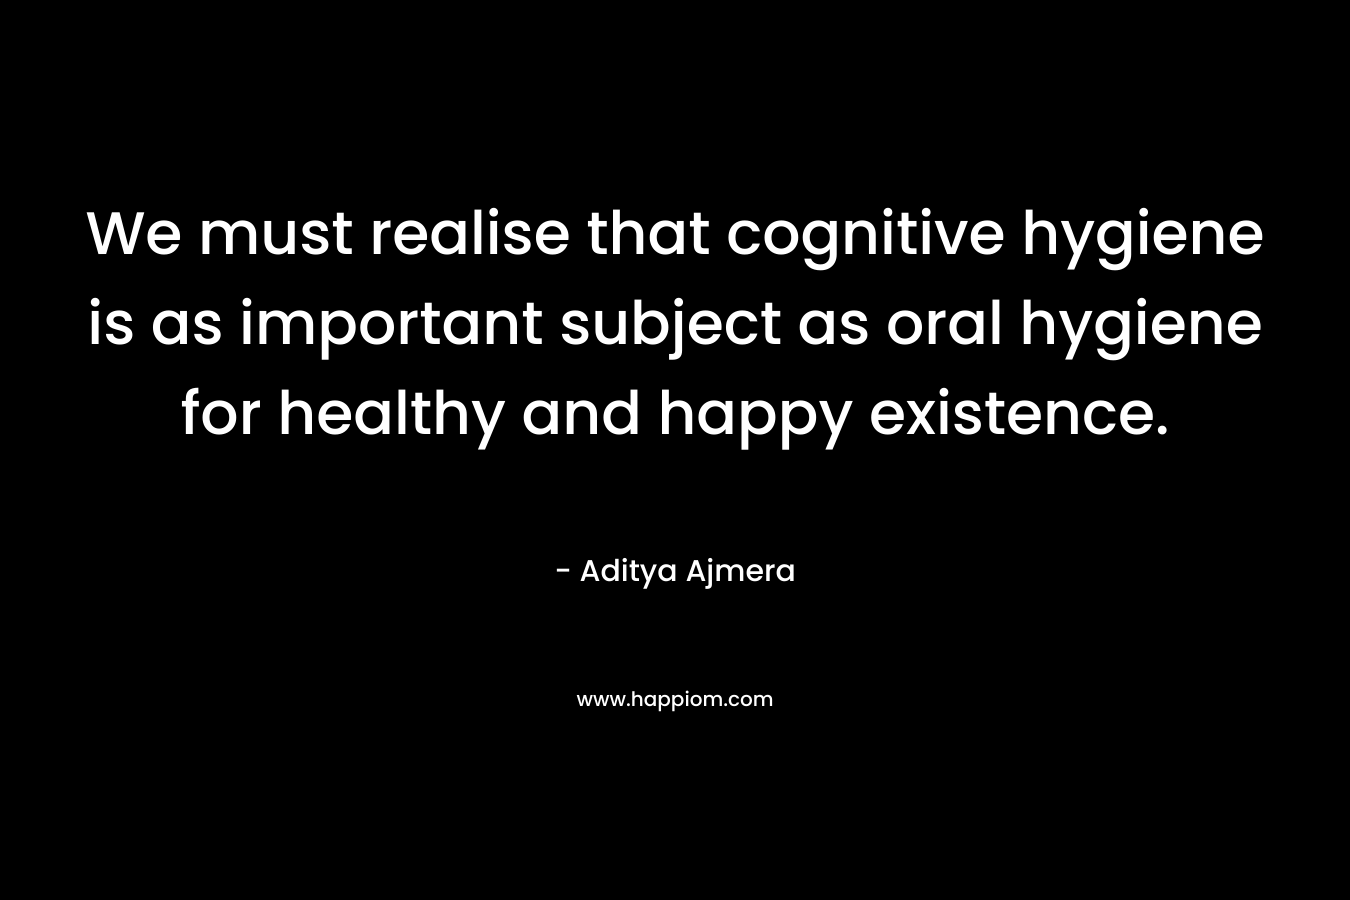 We must realise that cognitive hygiene is as important subject as oral hygiene for healthy and happy existence.